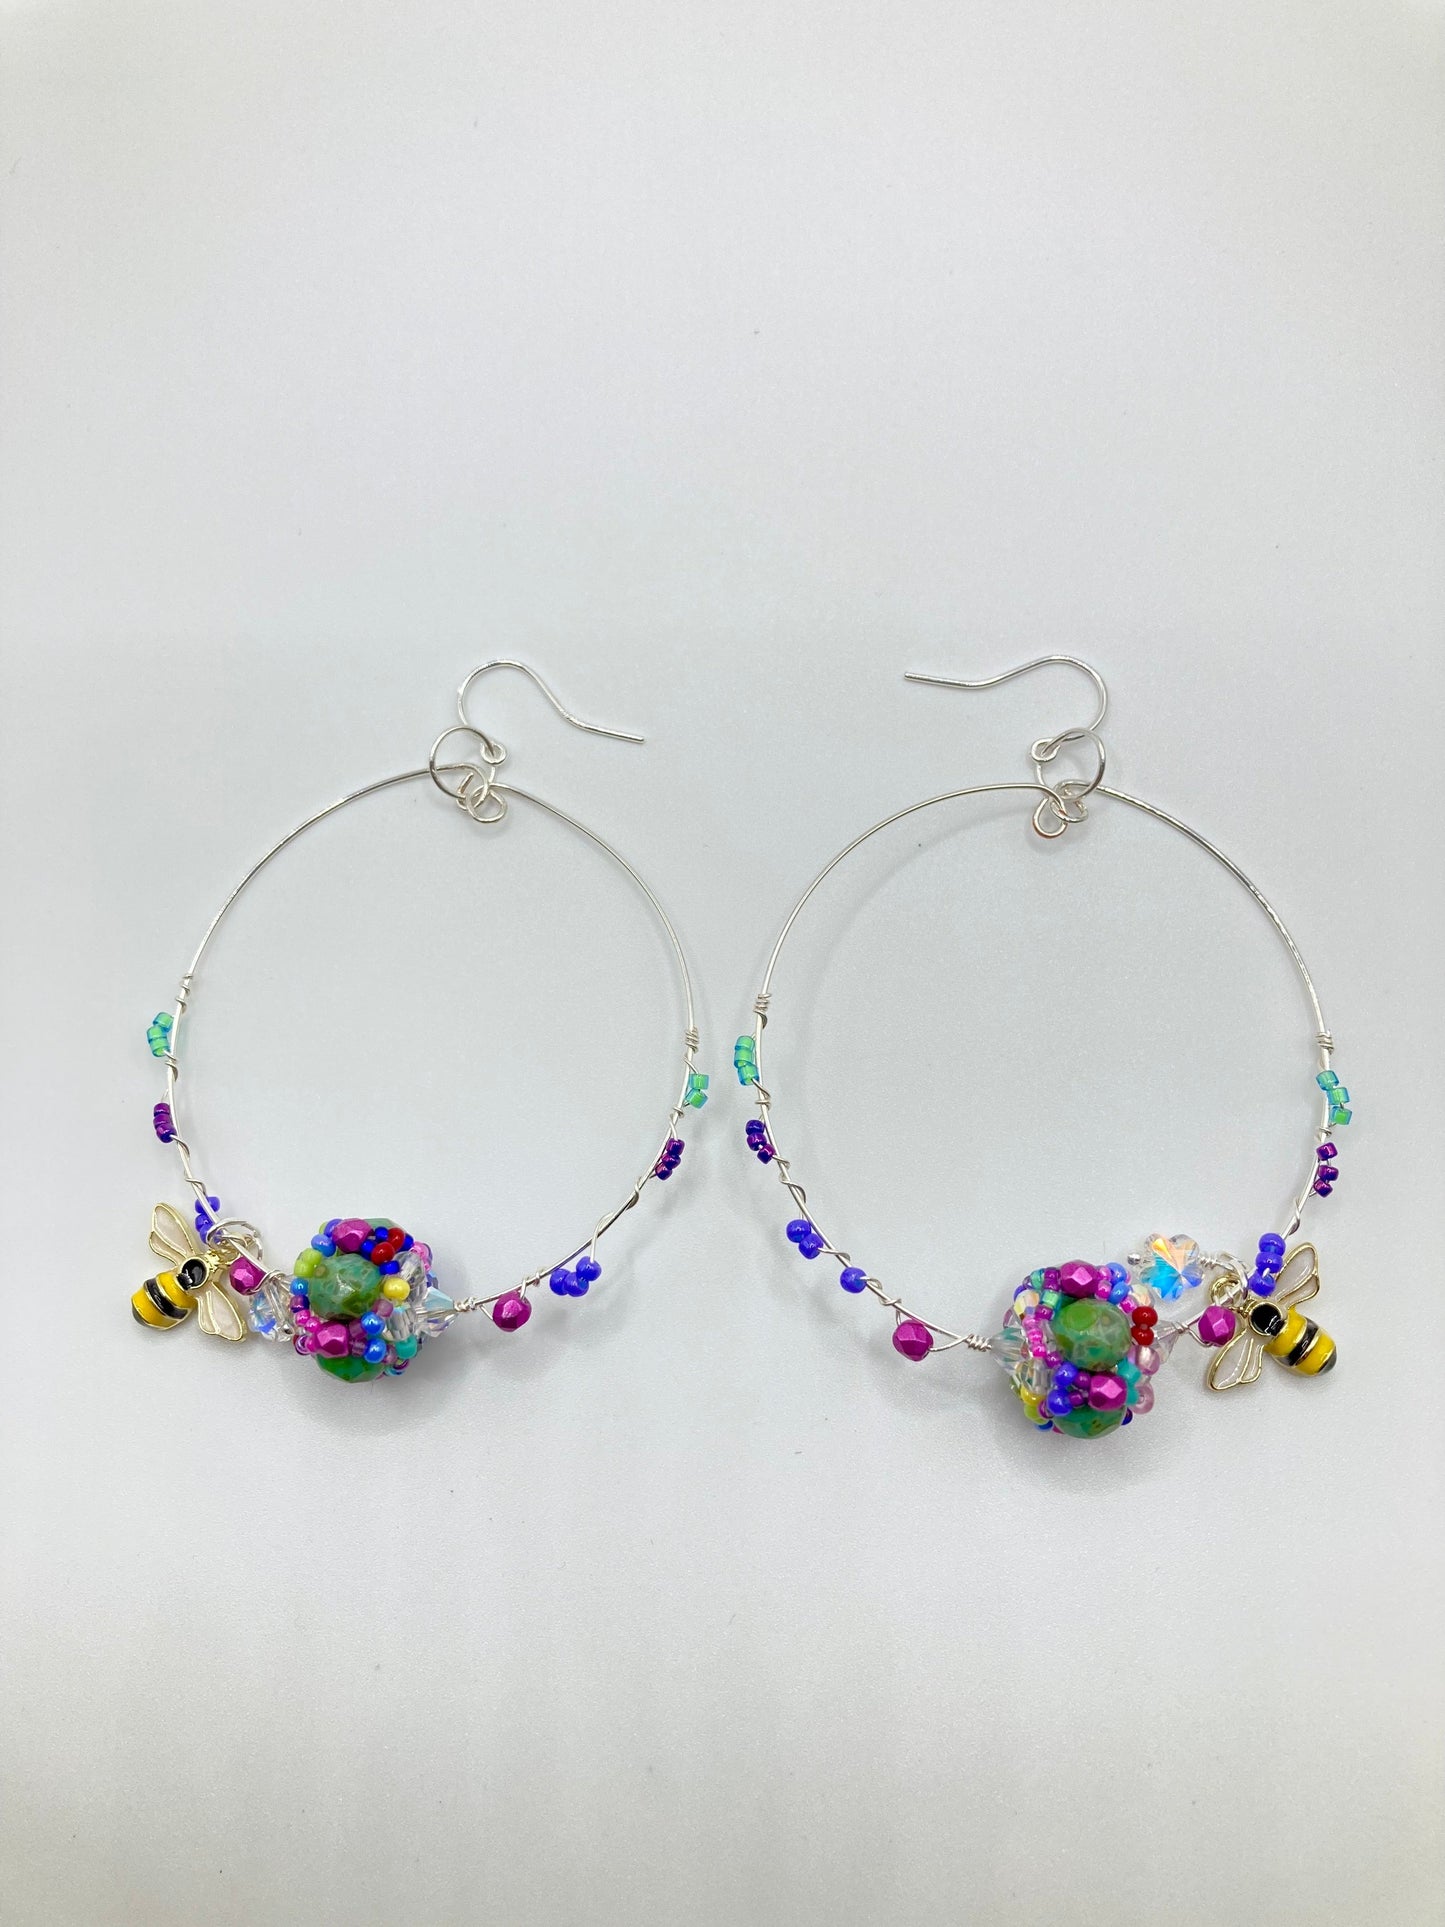 Handcrafted Beaded Jewelry made by Mango Fish in Western MA inspired by the Bridge of Flowers in Shelbourne Falls